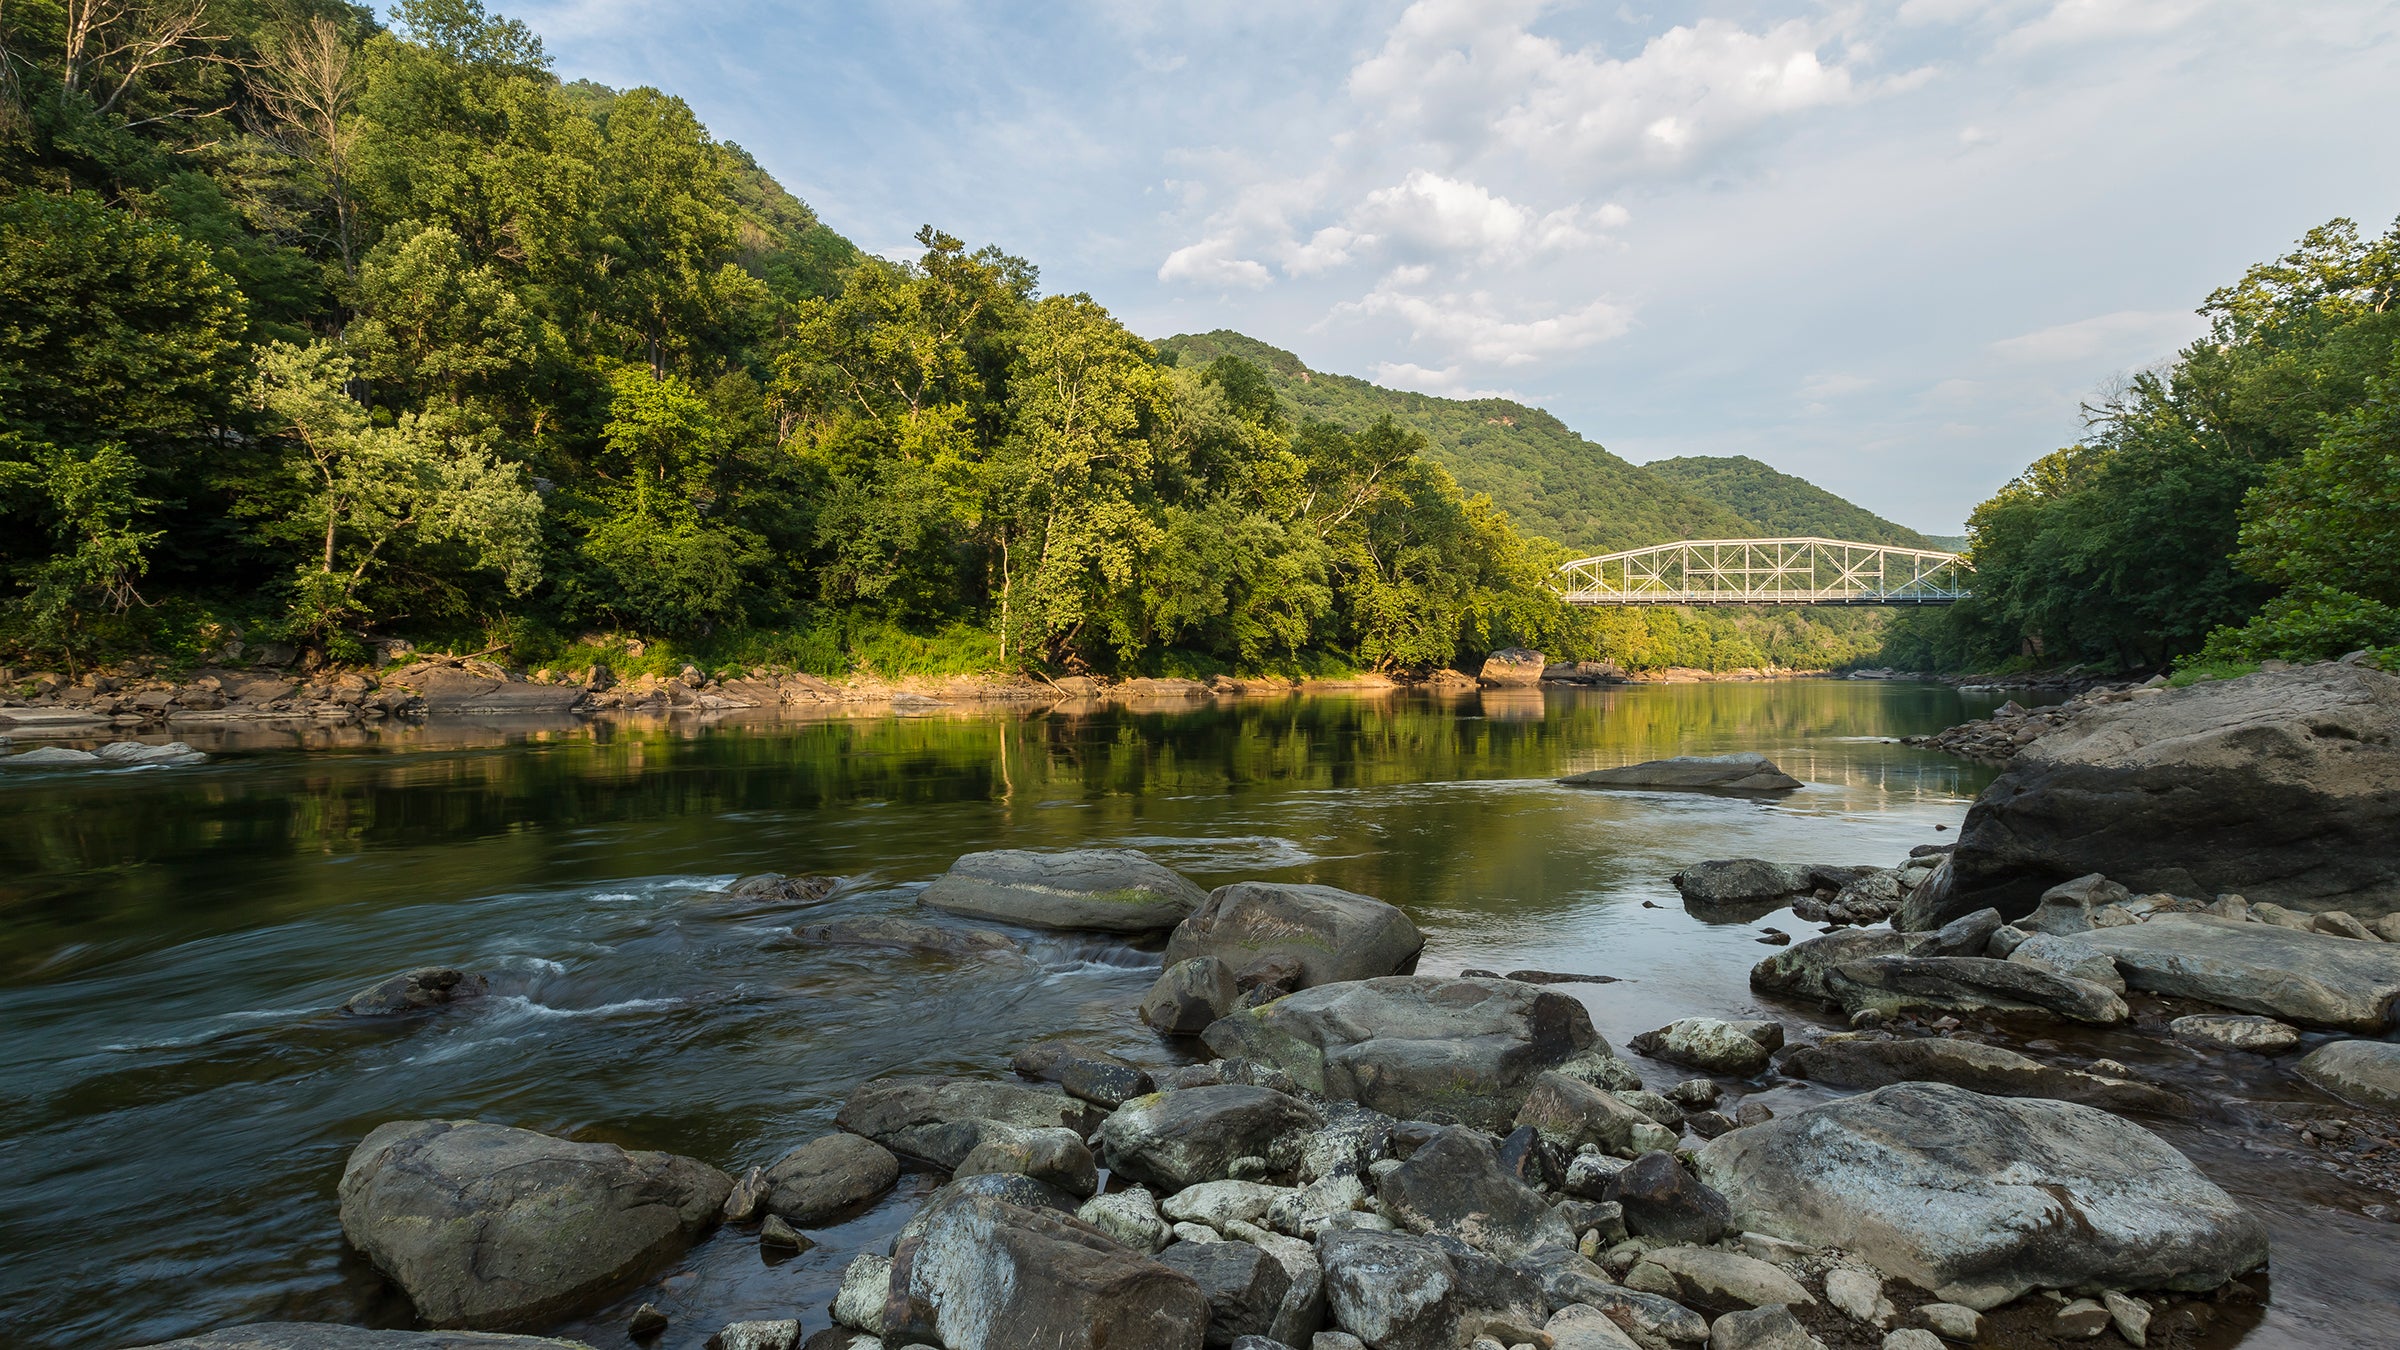 A scenic landscape of the New River Gorge.